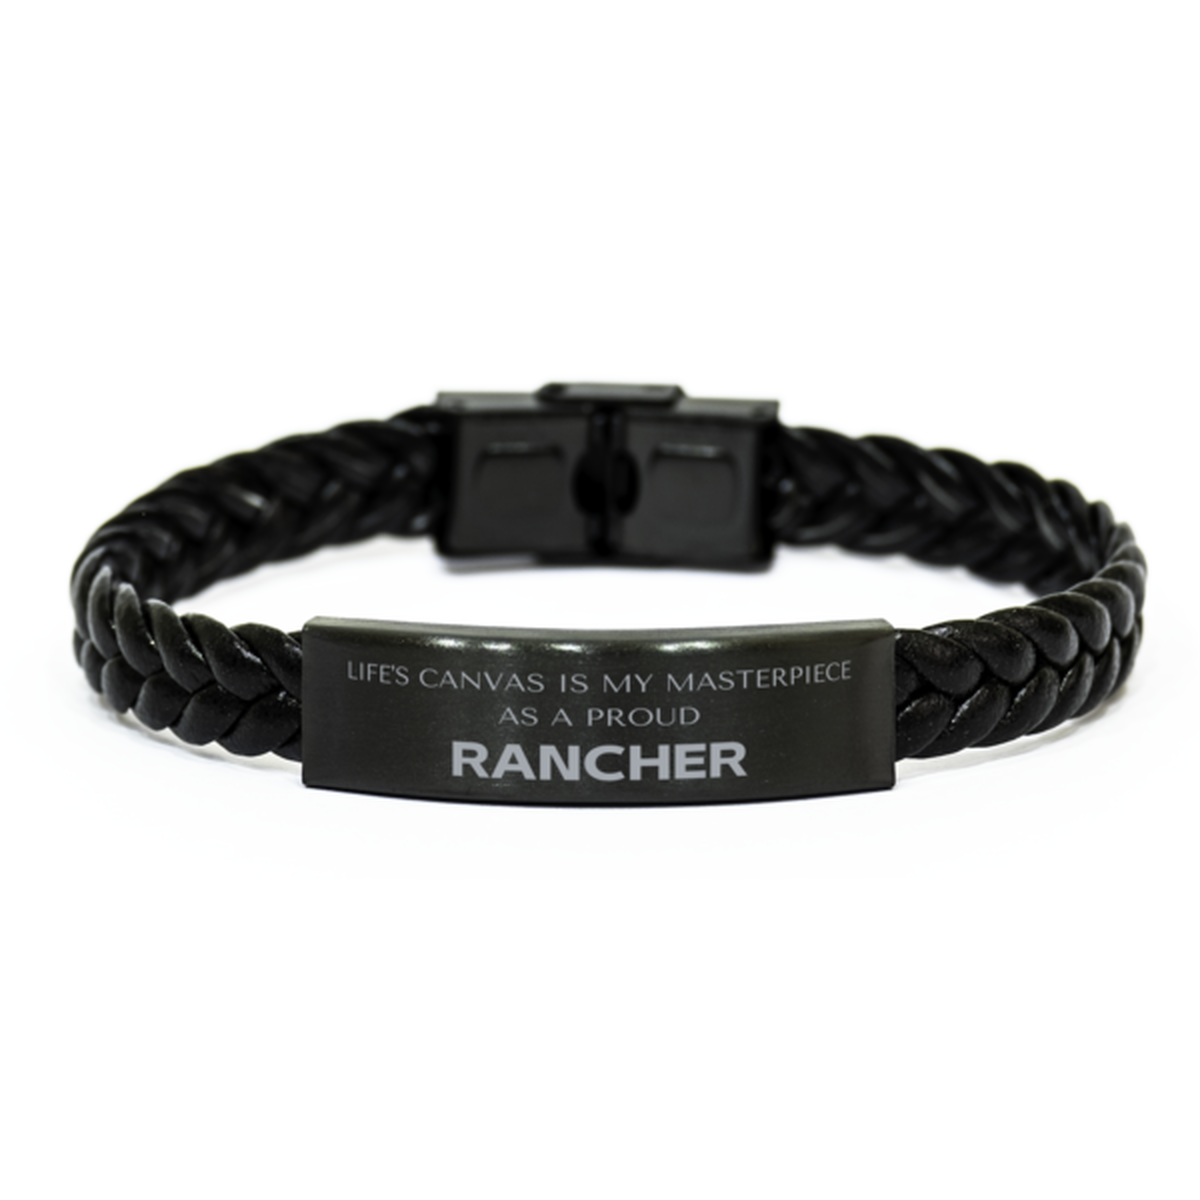 Proud Rancher Gifts, Life's canvas is my masterpiece, Epic Birthday Christmas Unique Braided Leather Bracelet For Rancher, Coworkers, Men, Women, Friends